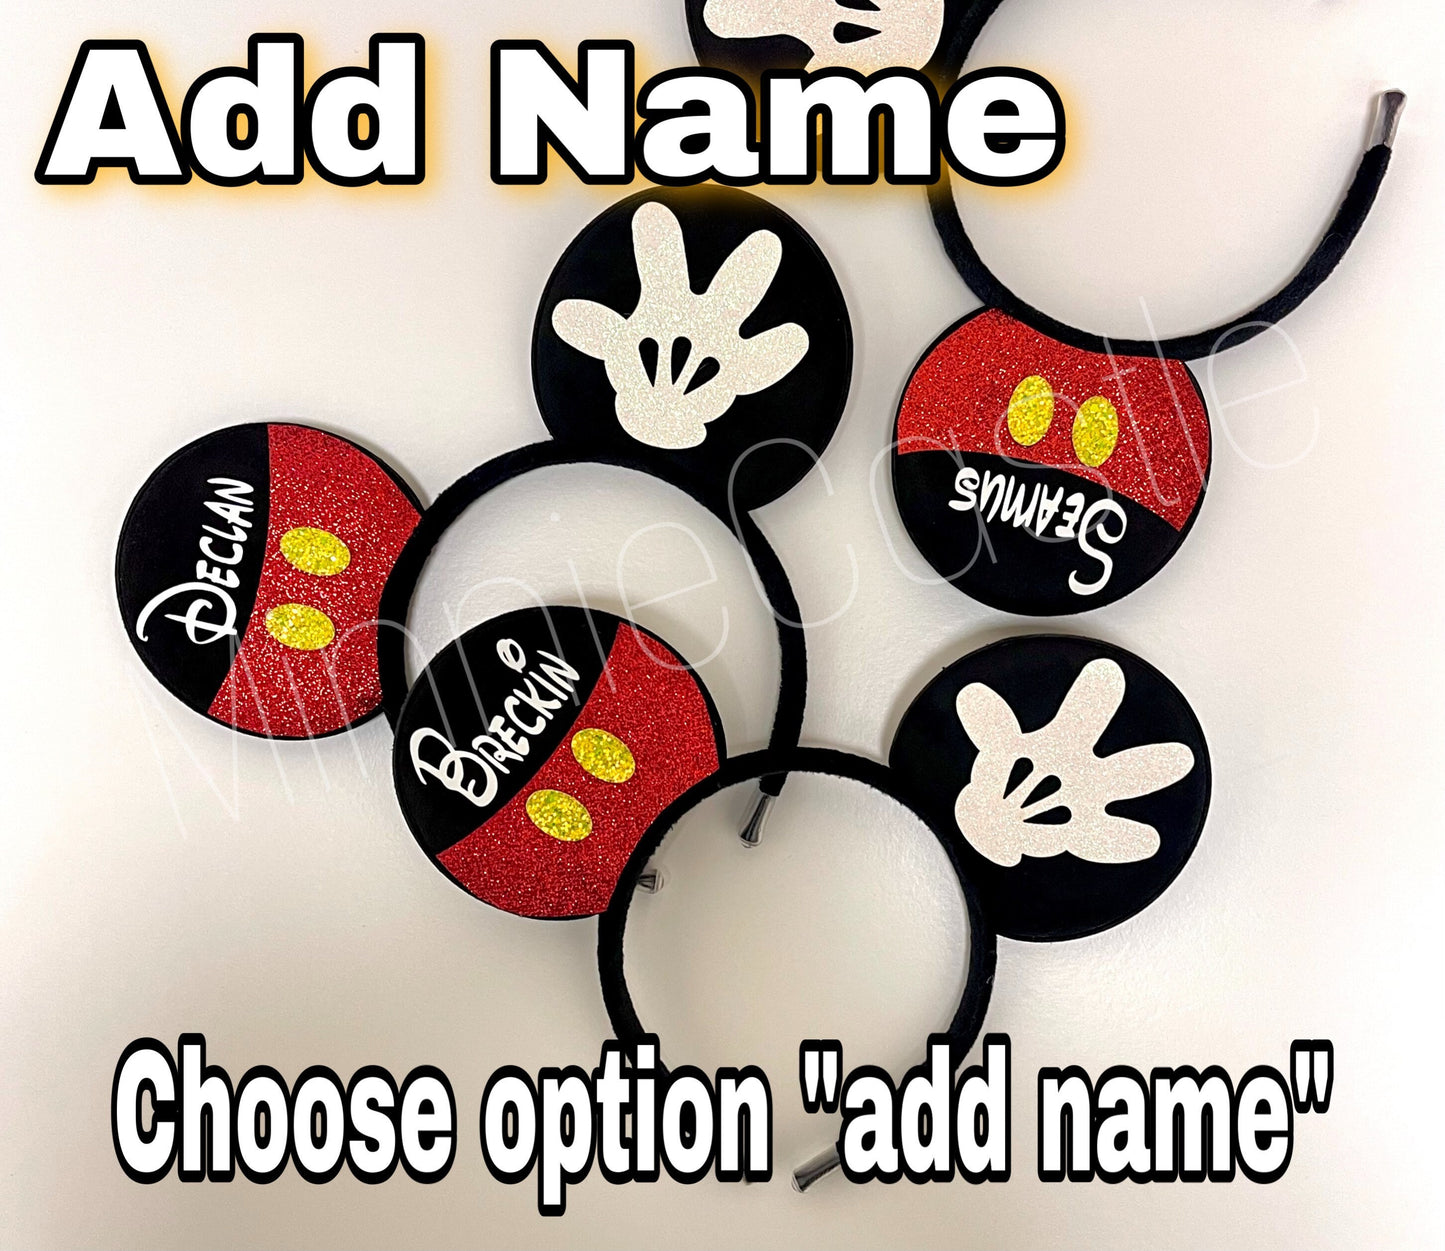 Personalized Mouse Ears